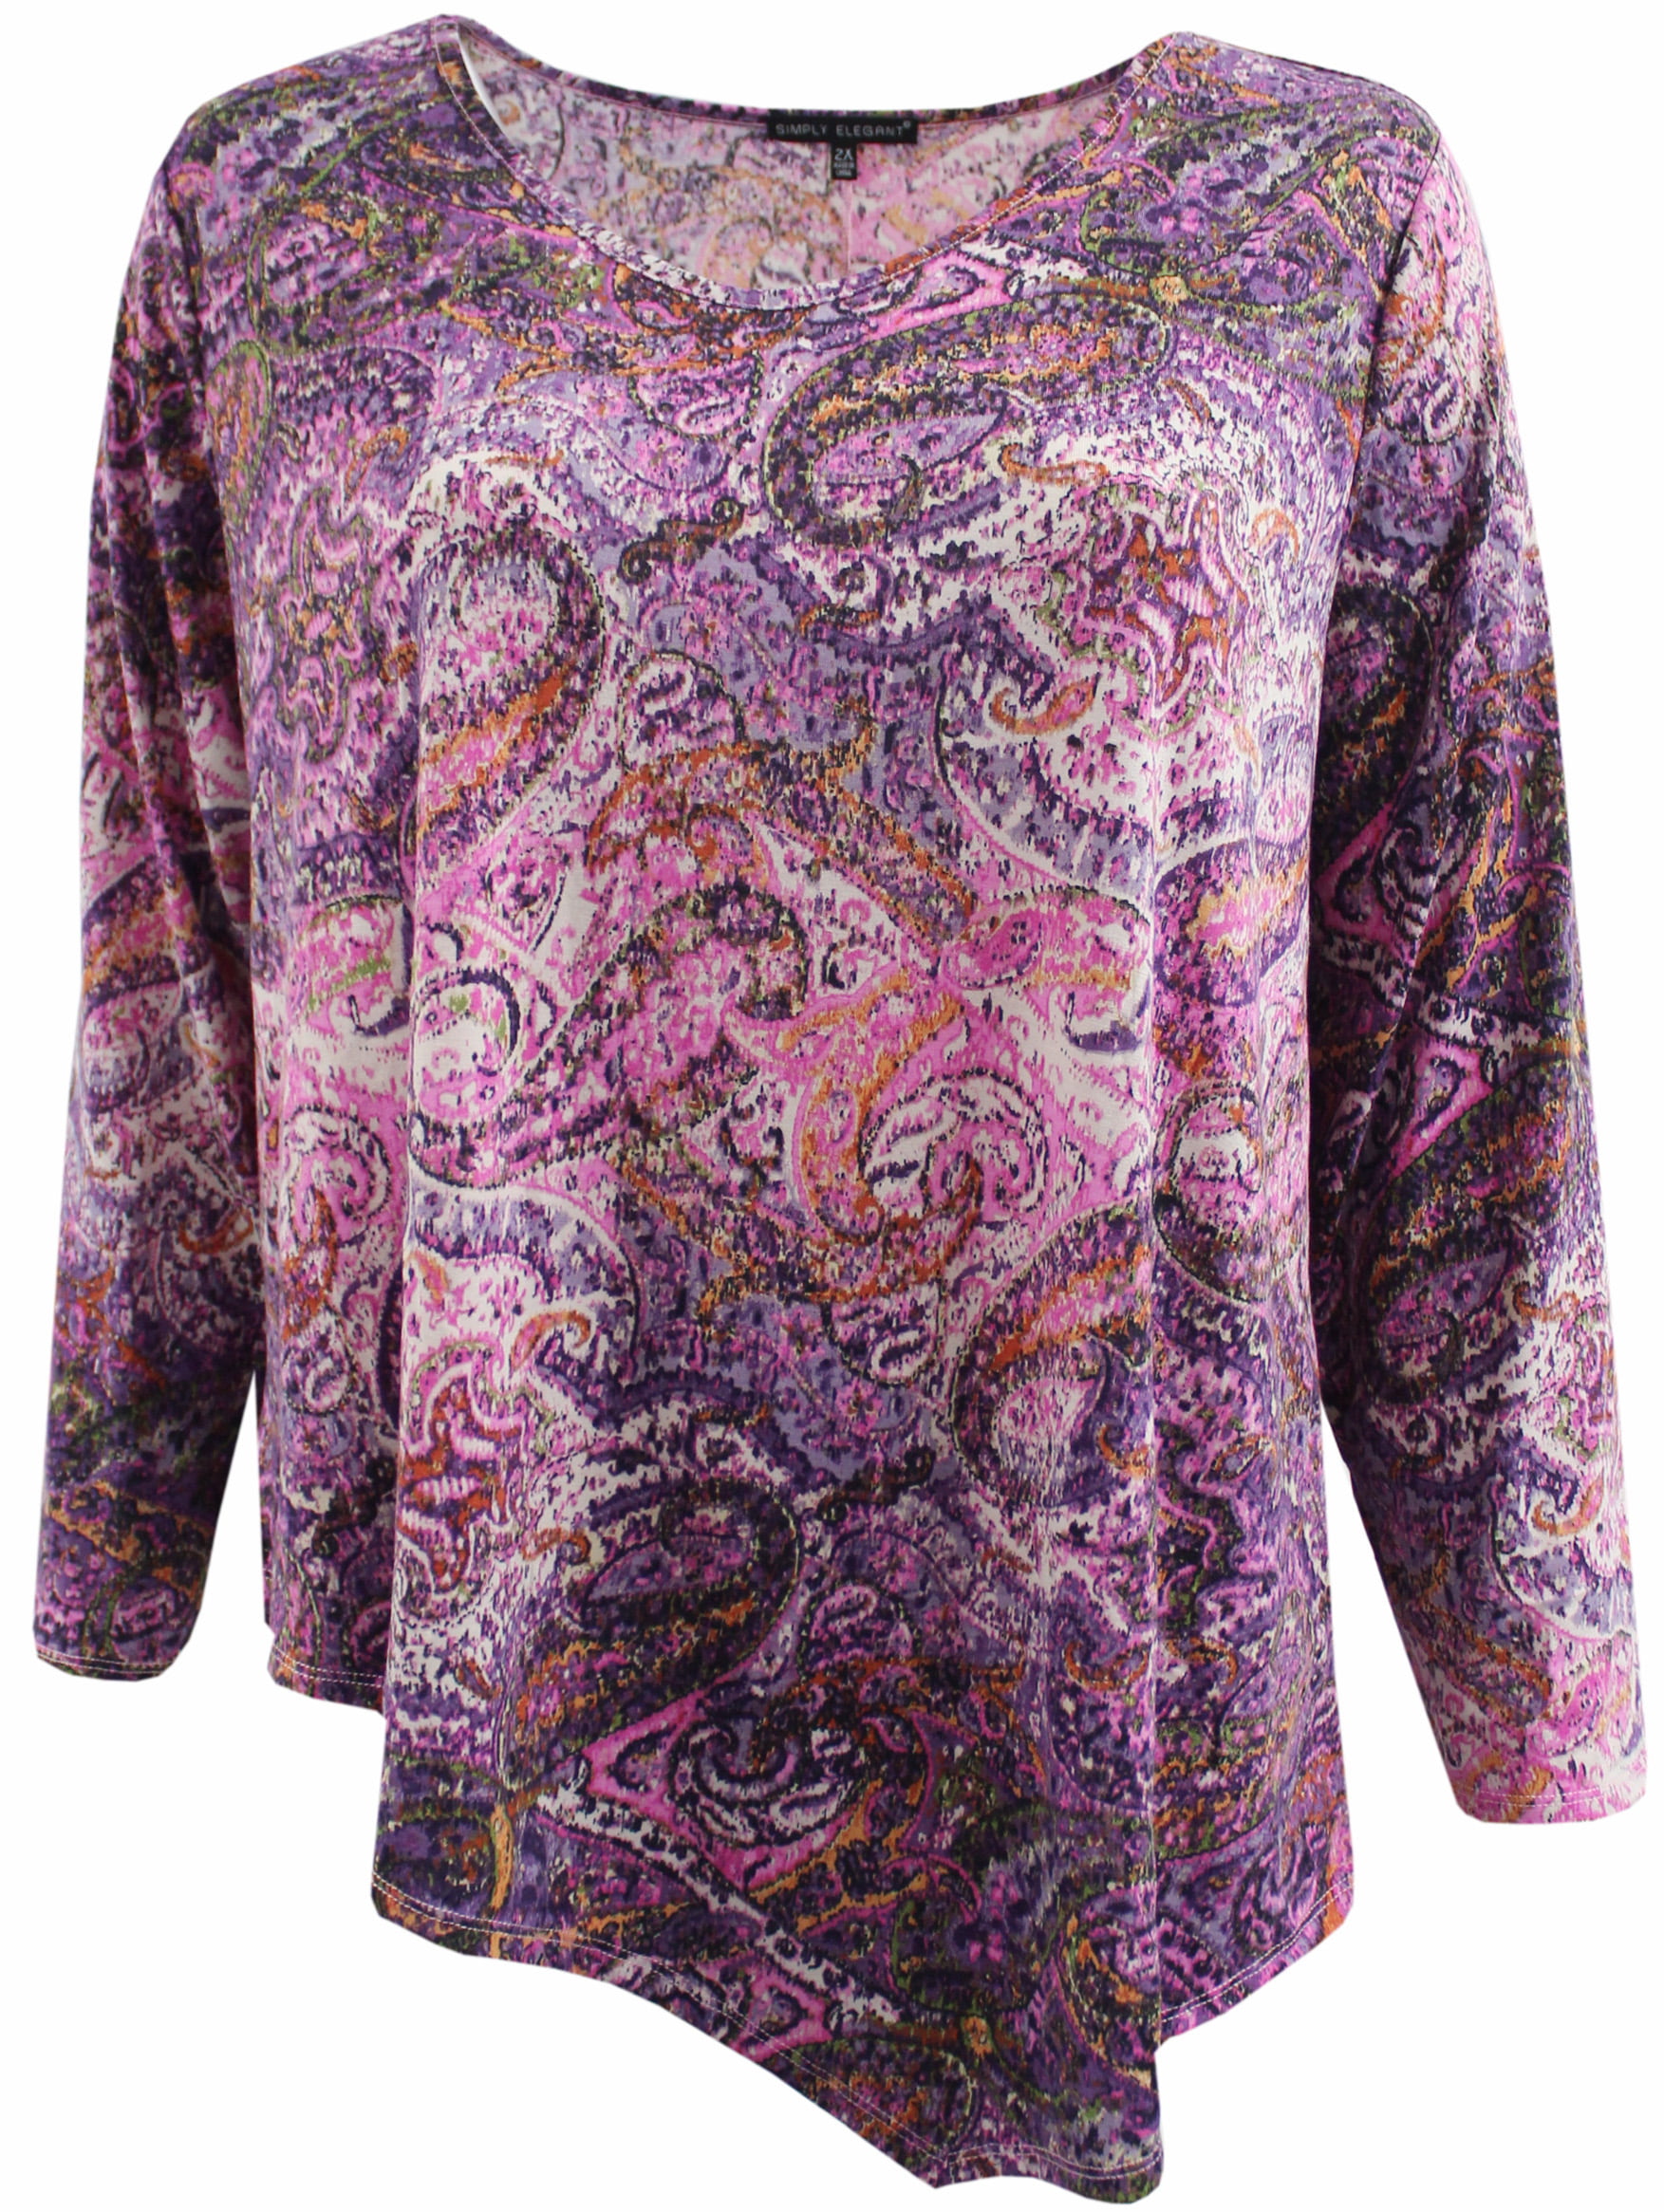 Womens Plus Size Colorful Paisley Flowy Knit Sweater Blouse Tee Shirt ...